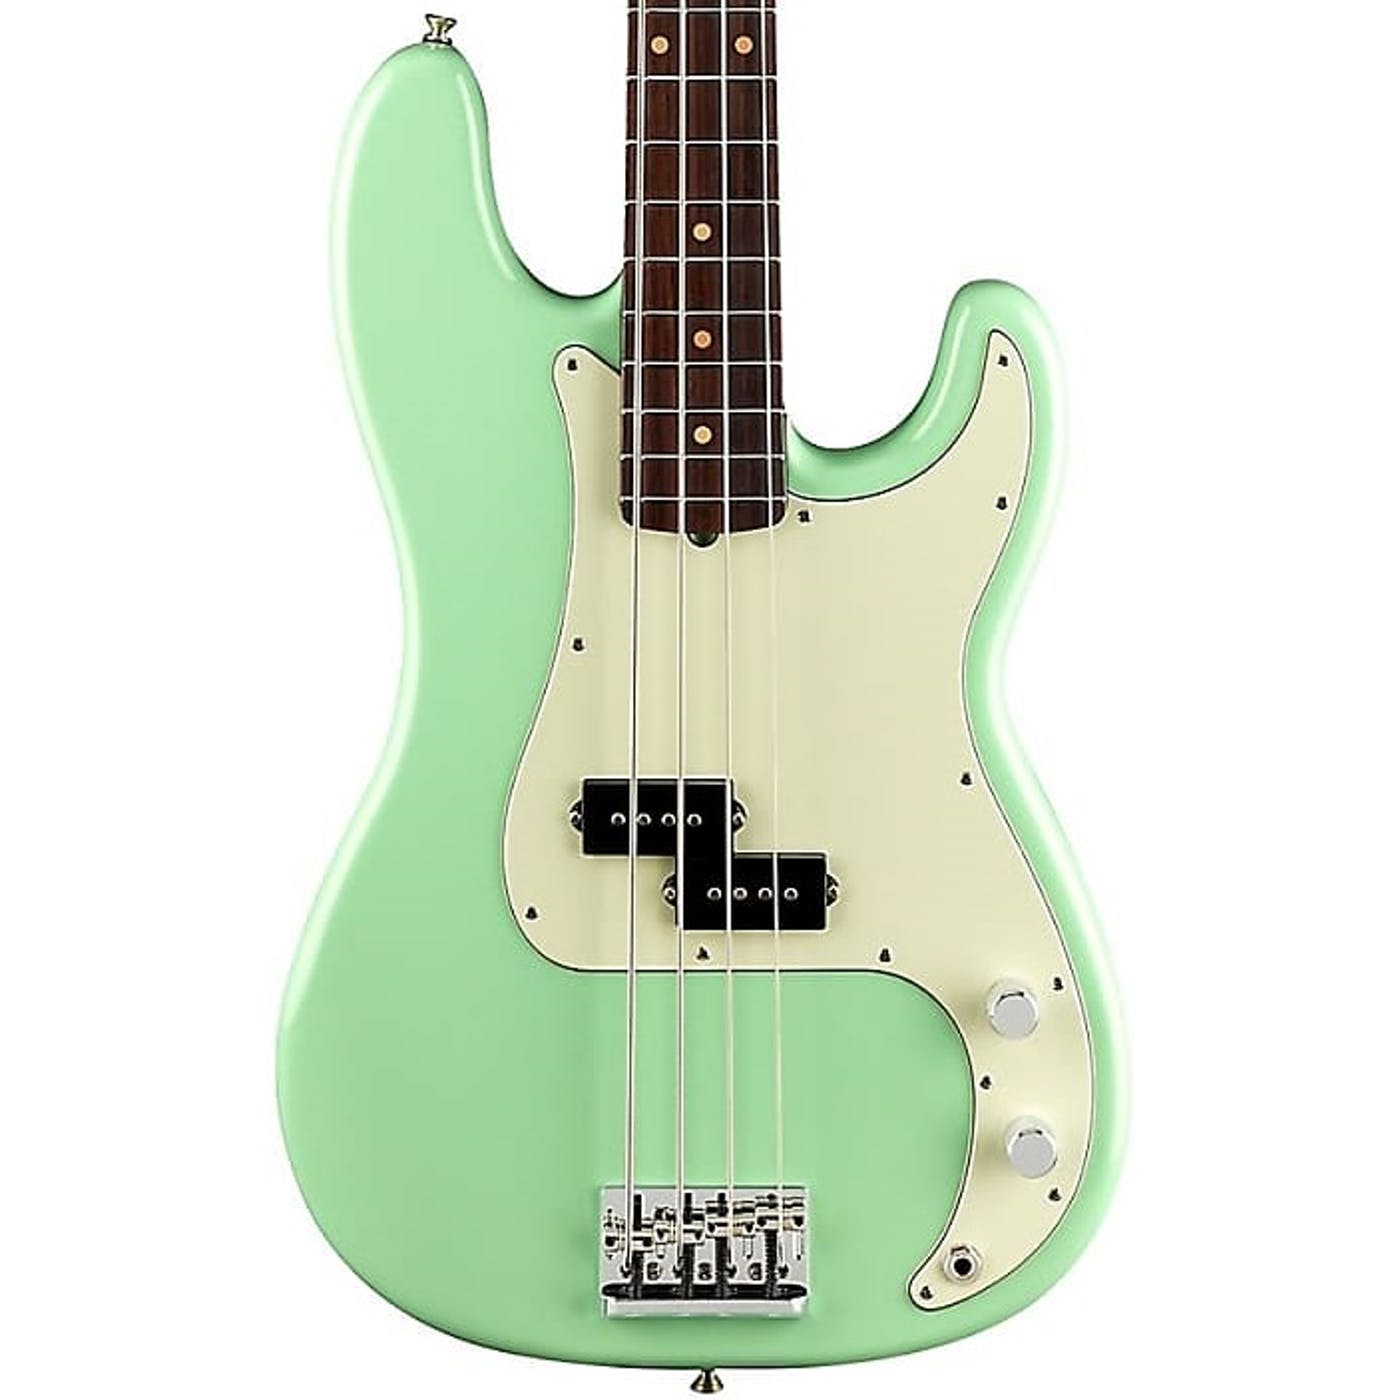 Fender-FSR-Limited-Edition-American-Professional-Precision-Bass-in-Surf-Green-with-Rosewood-Neck